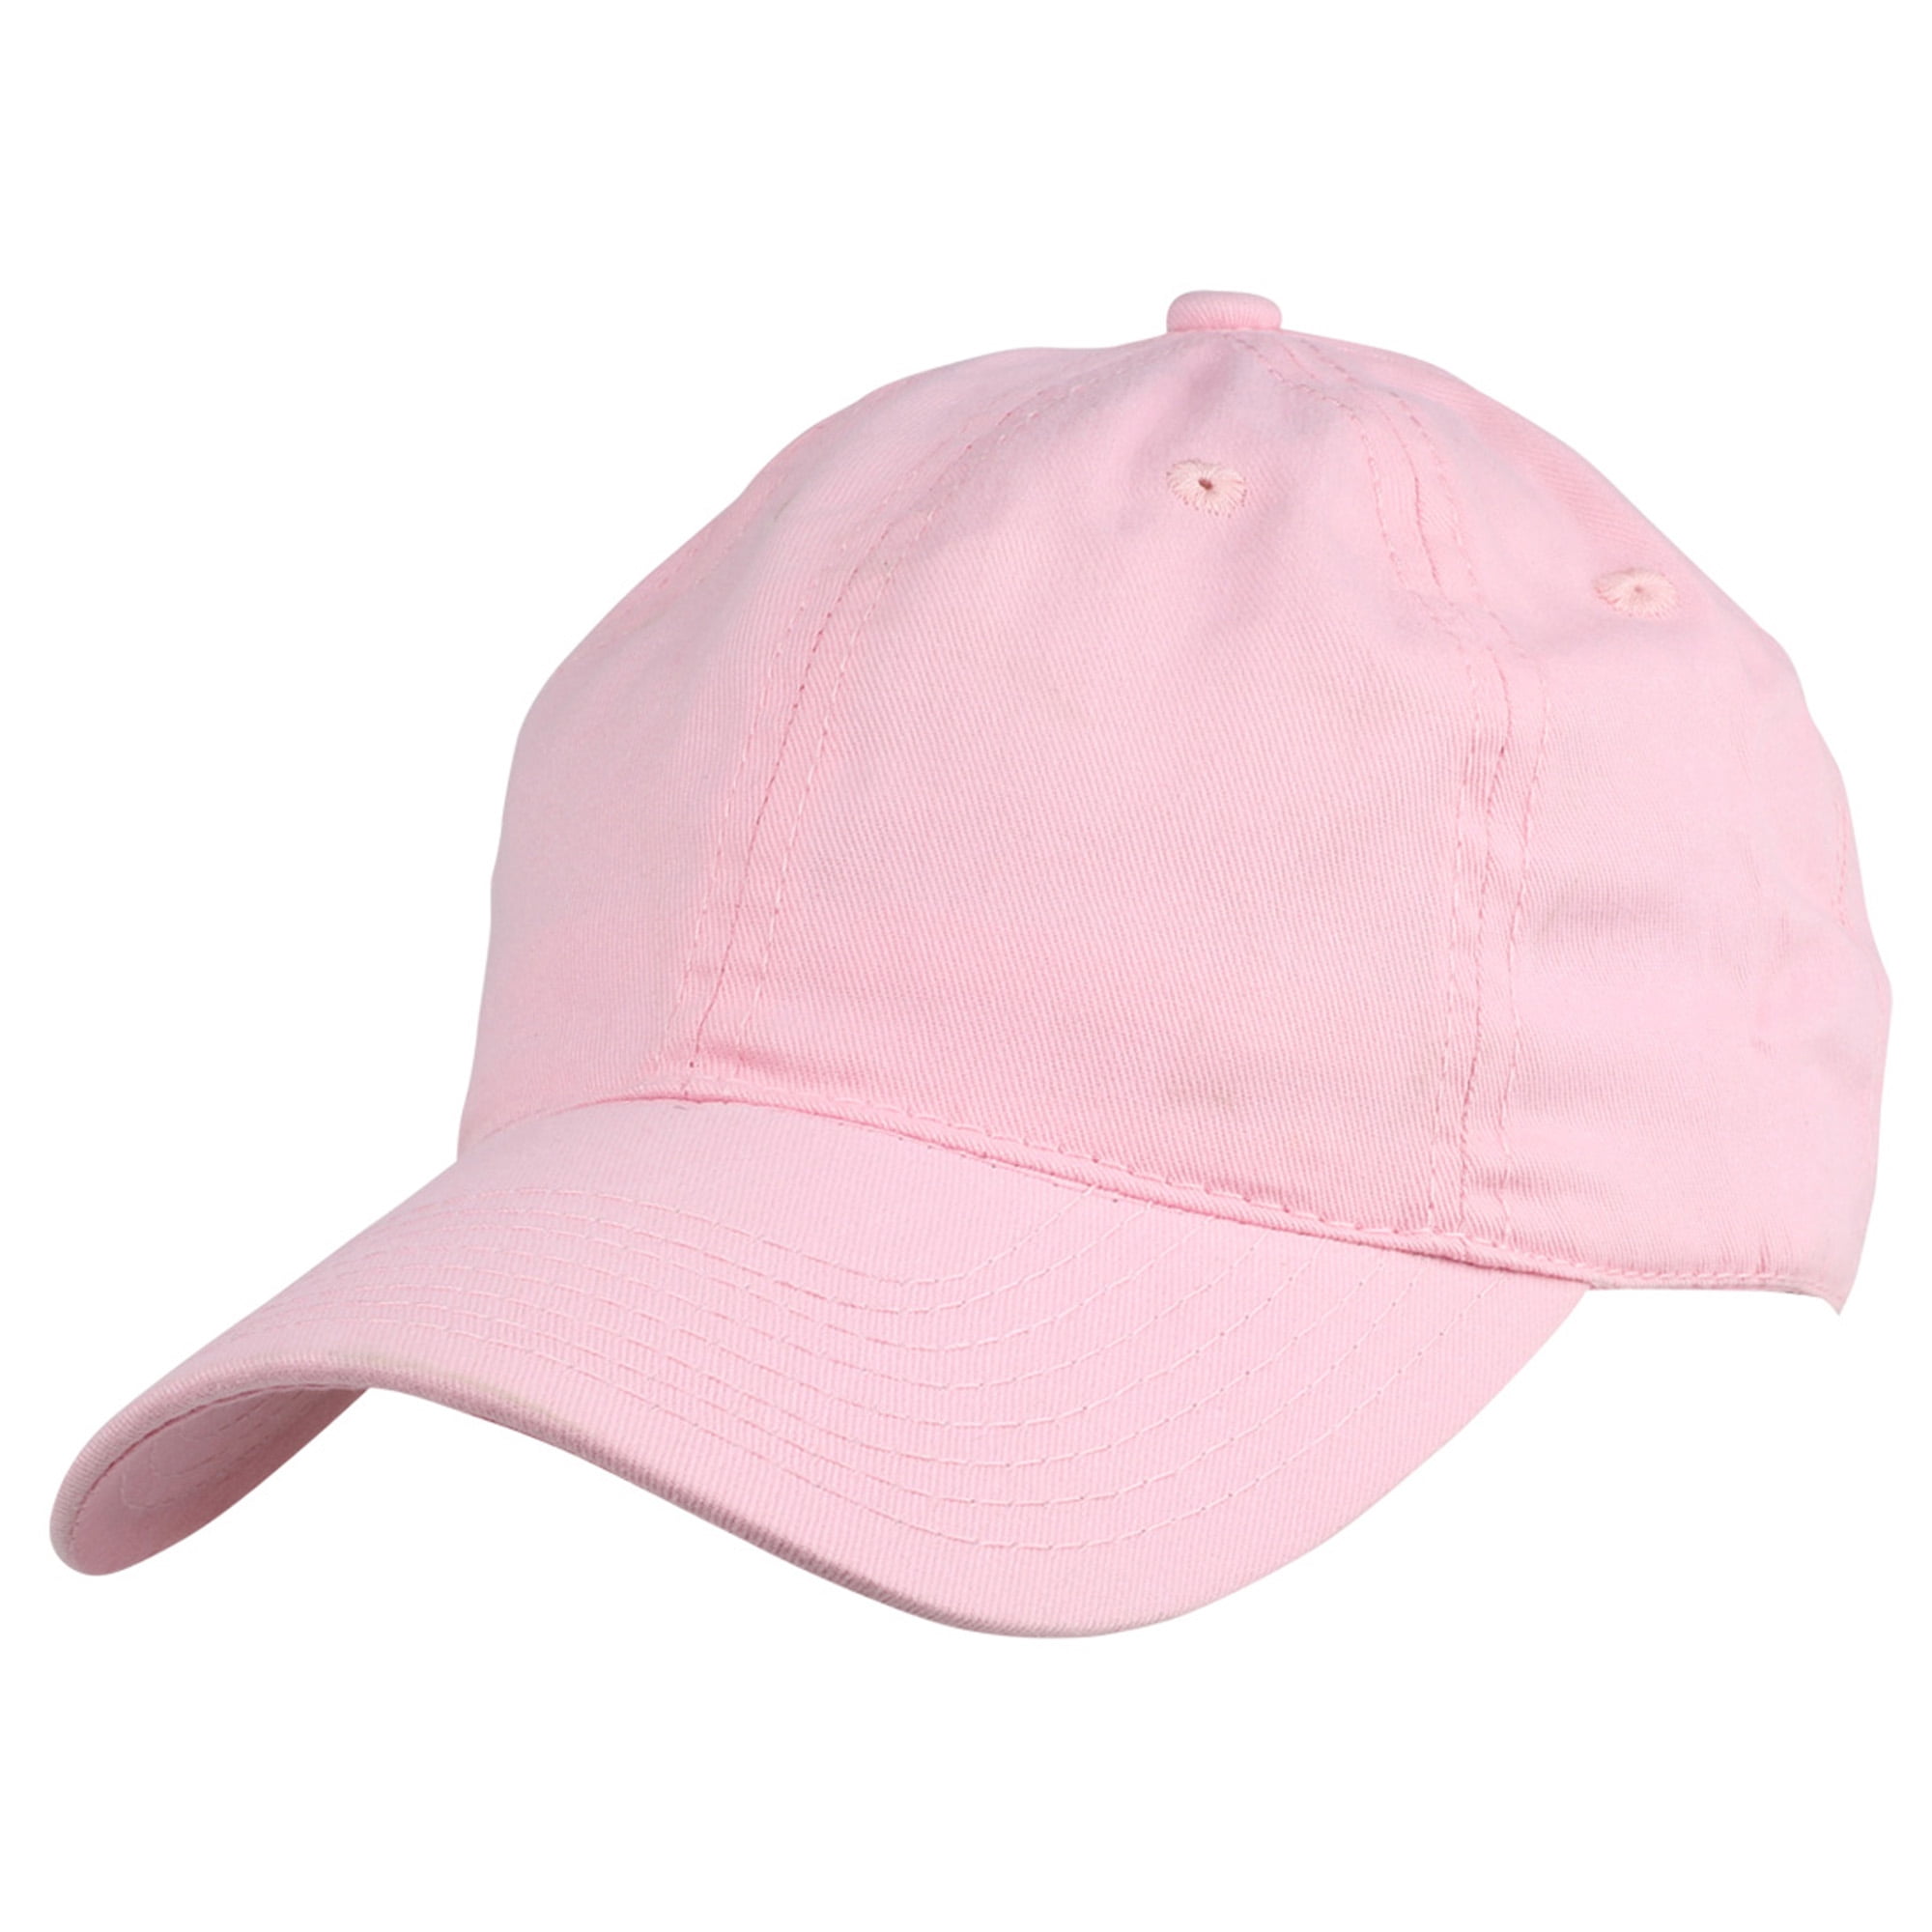 DALIX Womens Pastel Lovers Cap - Adjustable Hat with Velcro Closure in ...